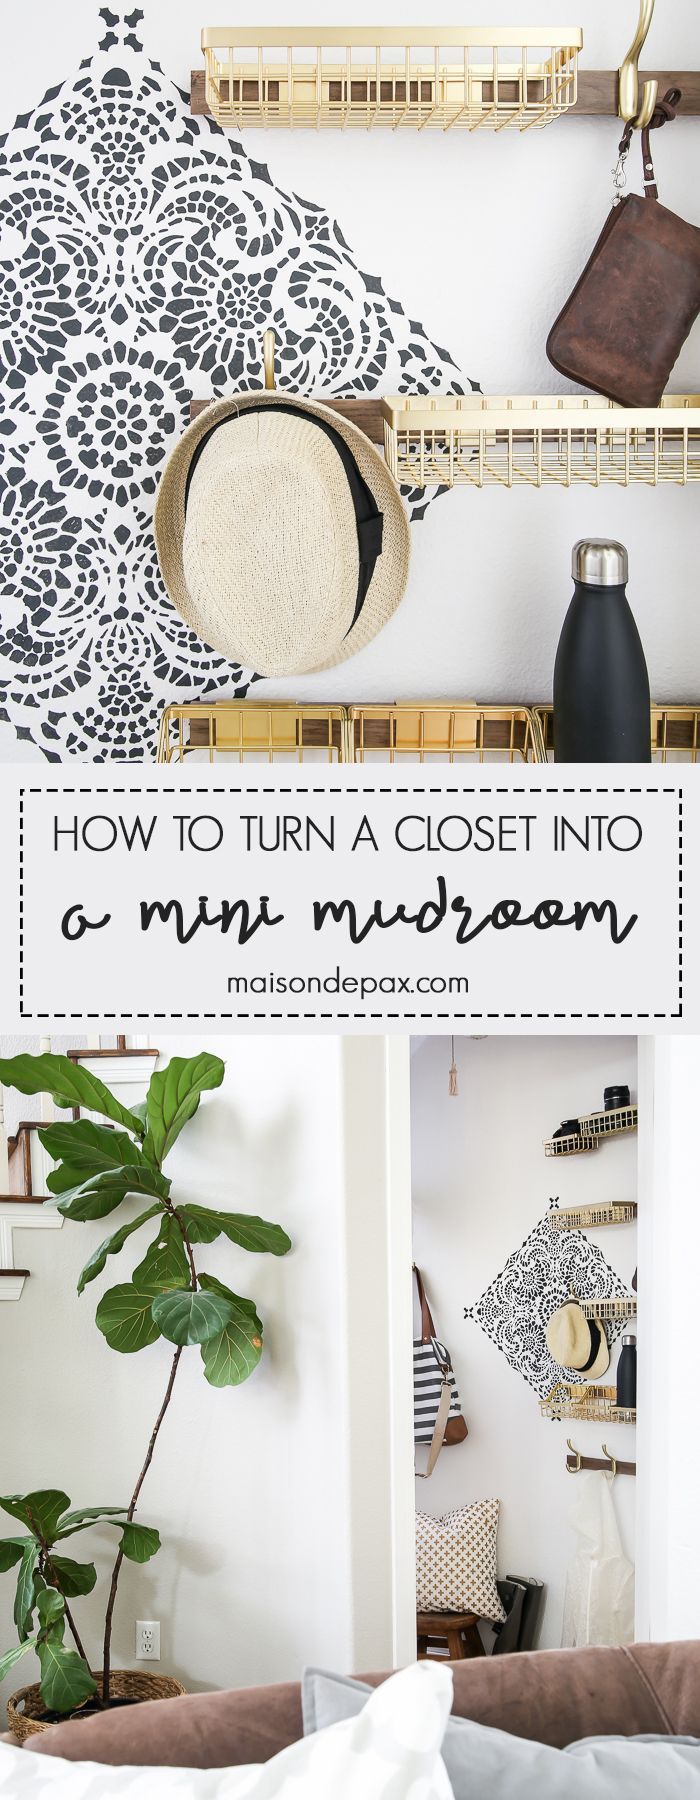 How to turn closet into mudroom: What an adorable space! Baskets and hooks turn...